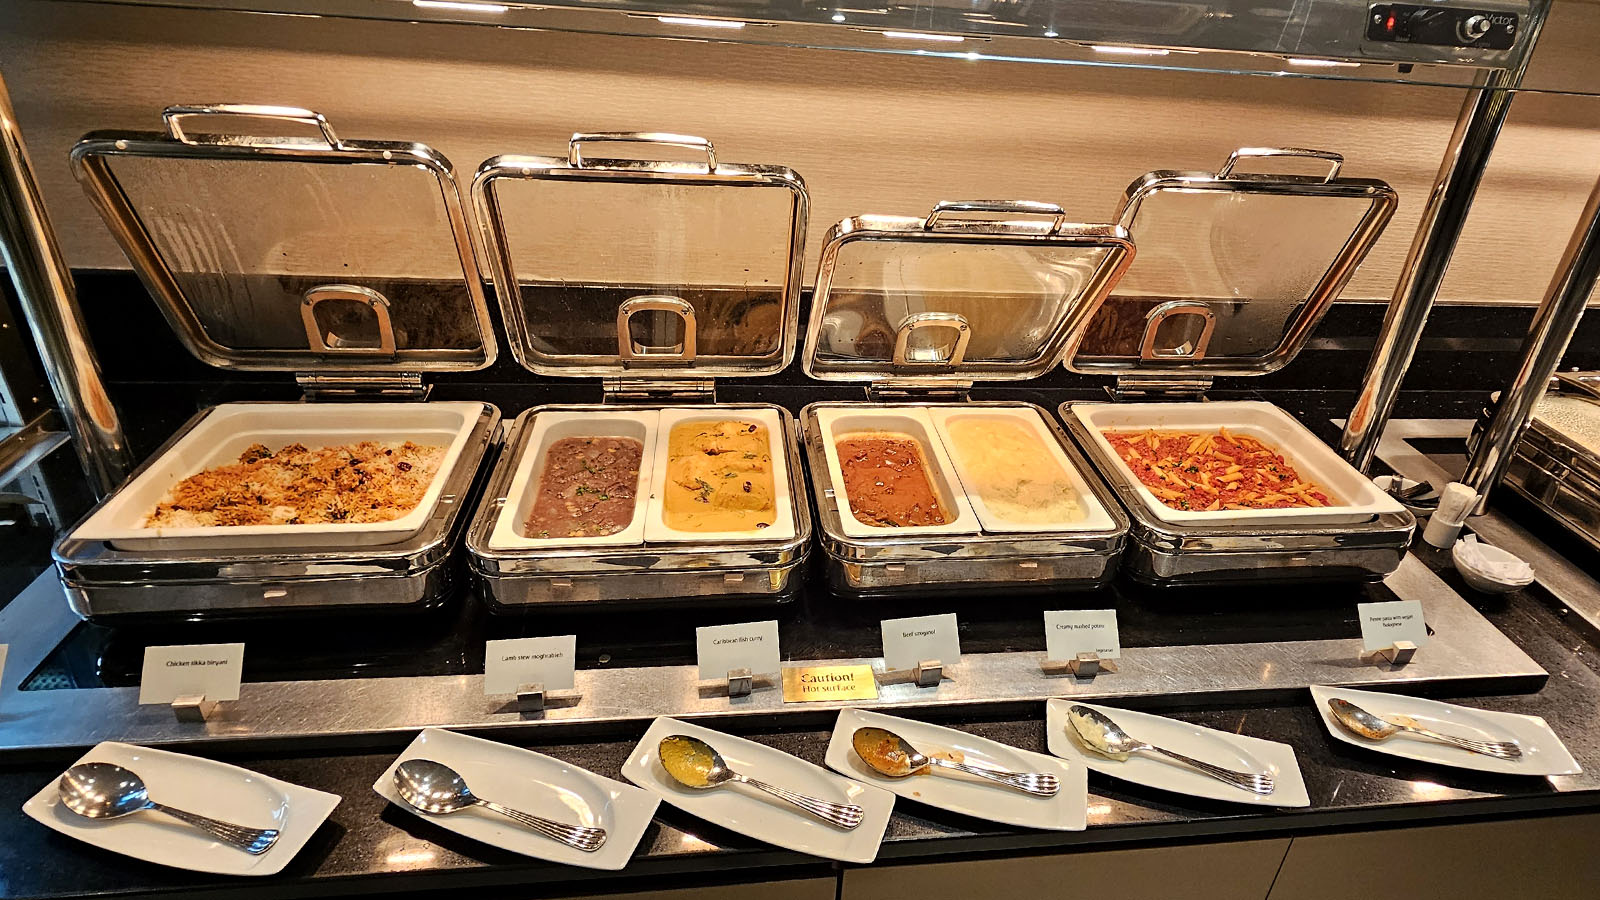 Hot dishes in the Emirates Business Class Lounge, Dubai T3 Concourse C